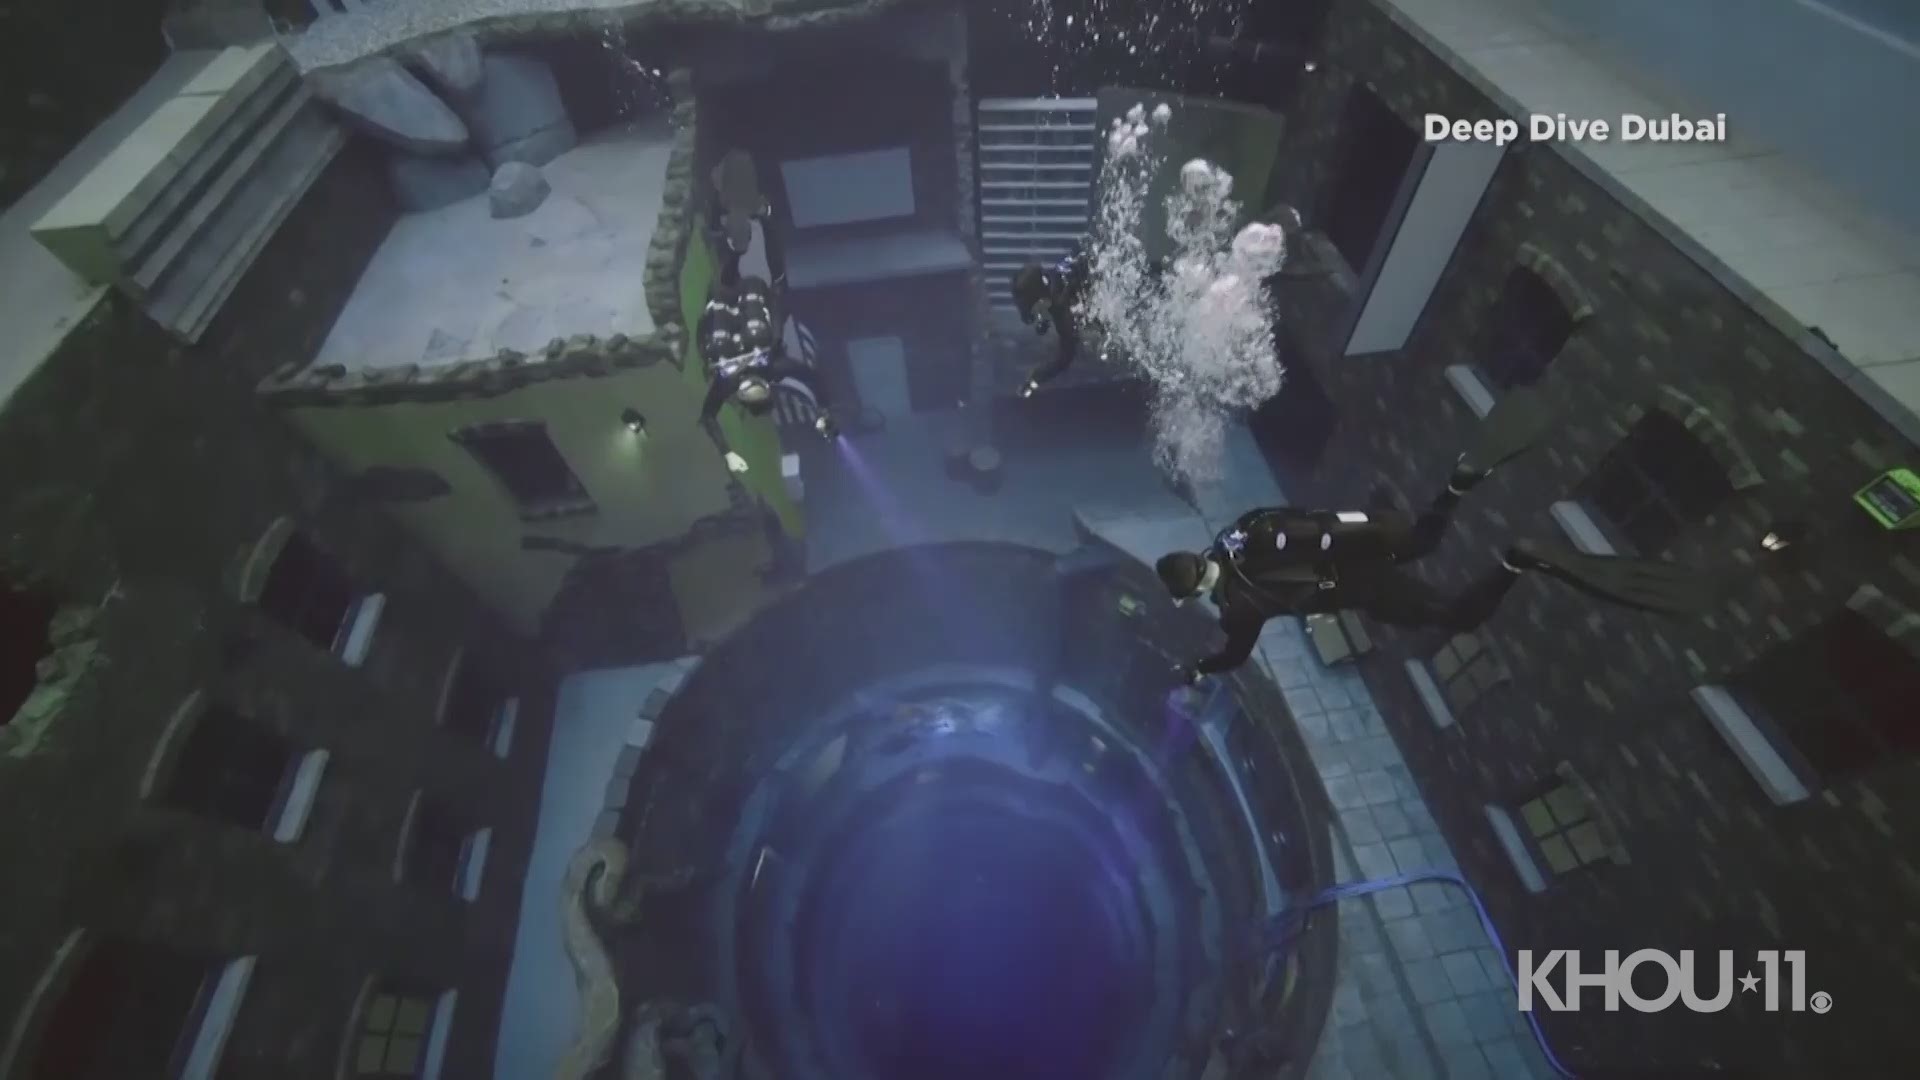 Divers in Dubai can explore an underwater 'sunken city' in the world's deepest pool, which reaches depths of almost 200 feet, at a facility called Deep Dive Dubai.